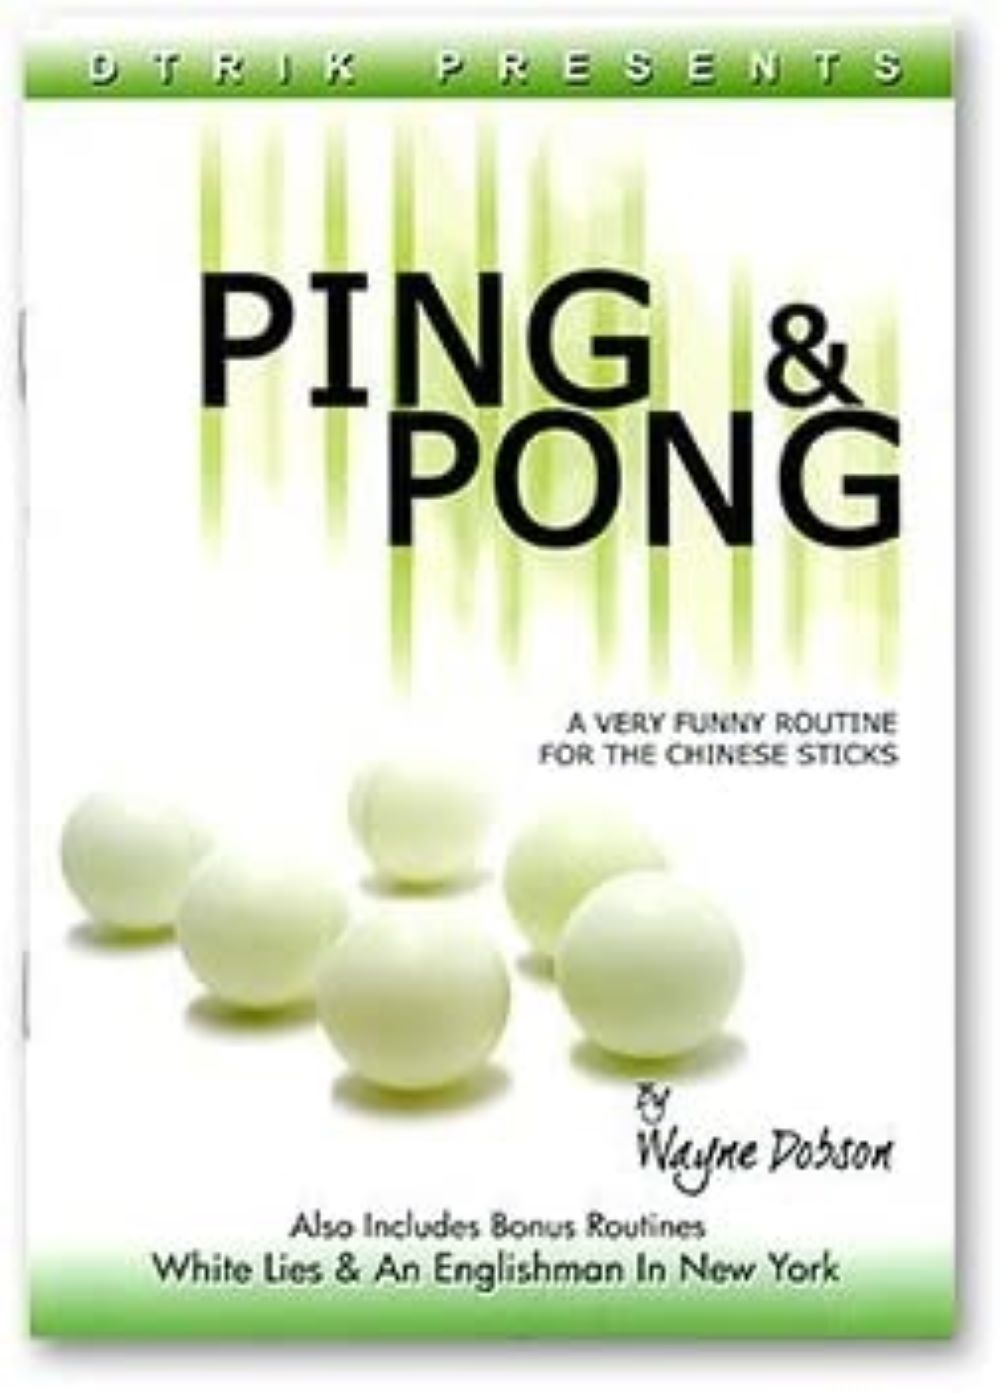 Ping & Pong - a Very Funny Routine for the Chinese Sticks - Ping and Pong Booklet